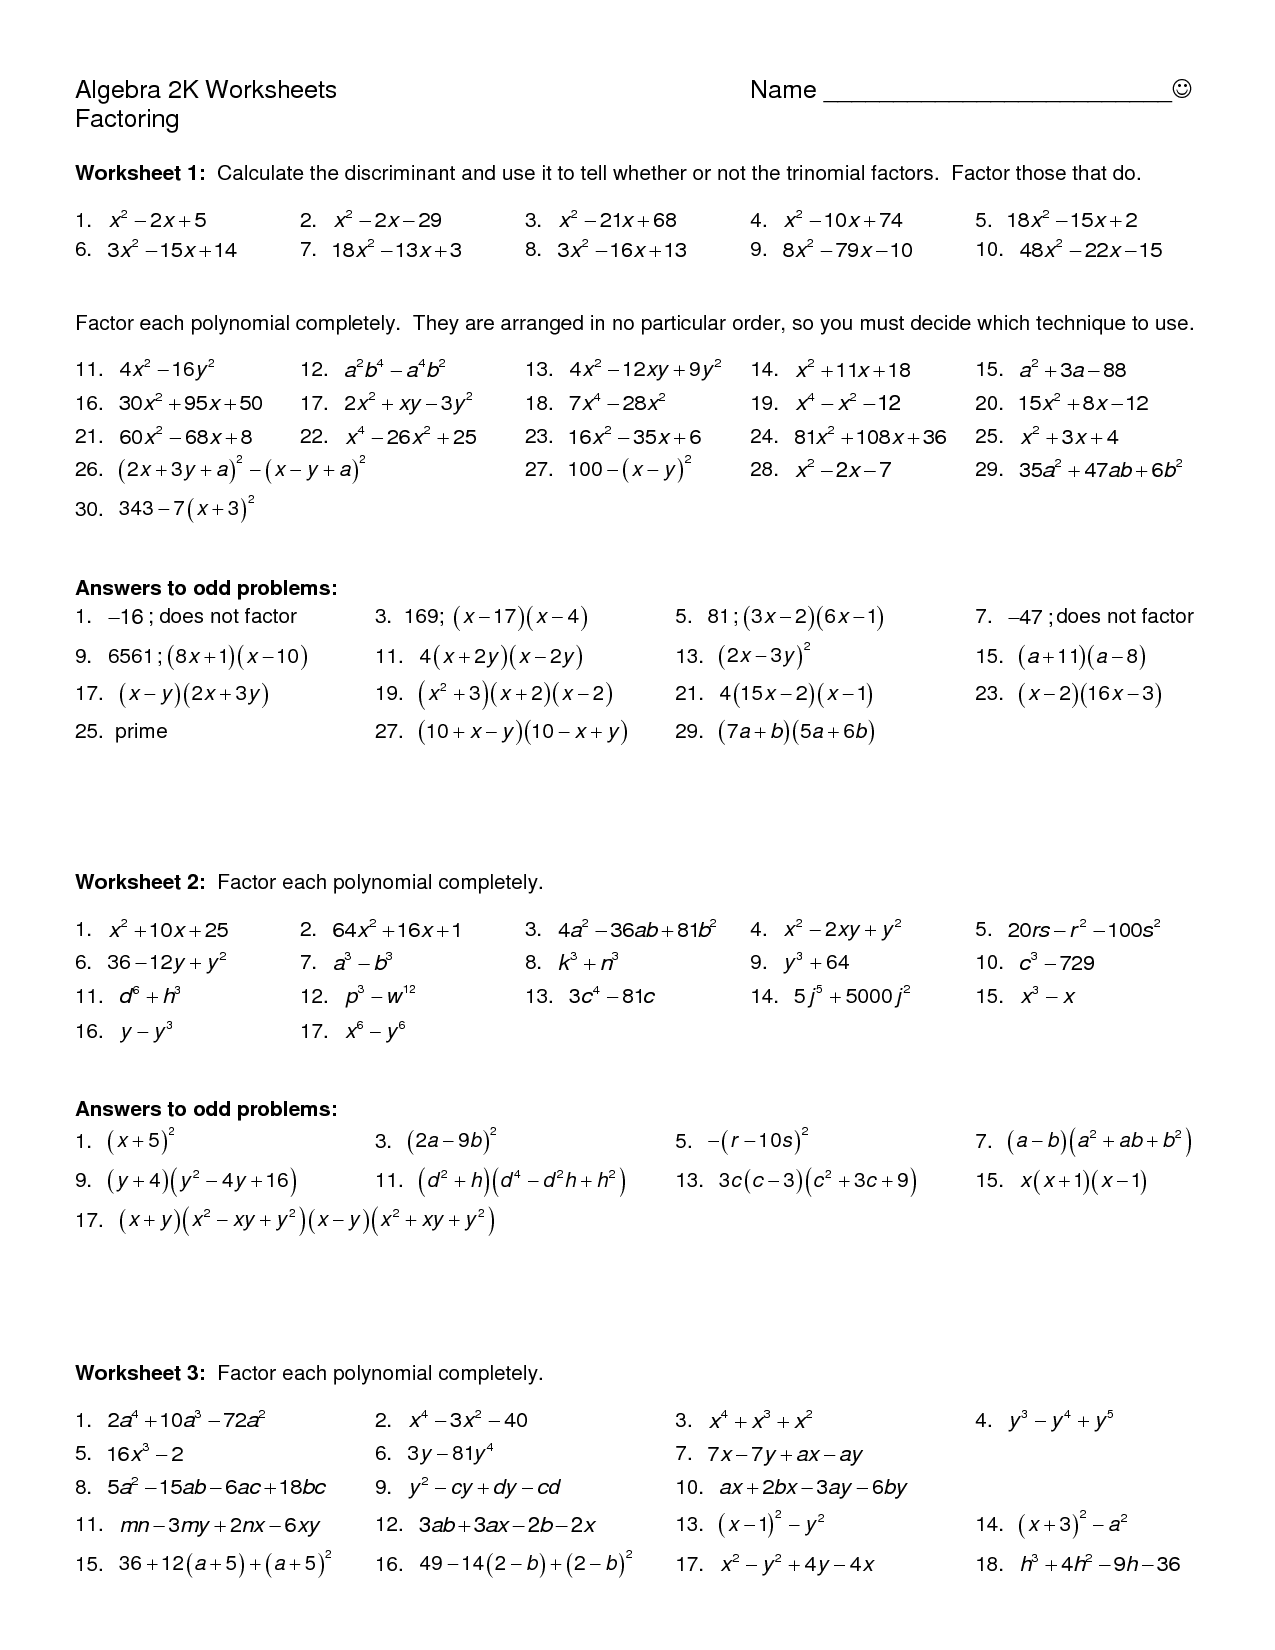 Multiplying Monomials Worksheet Answers